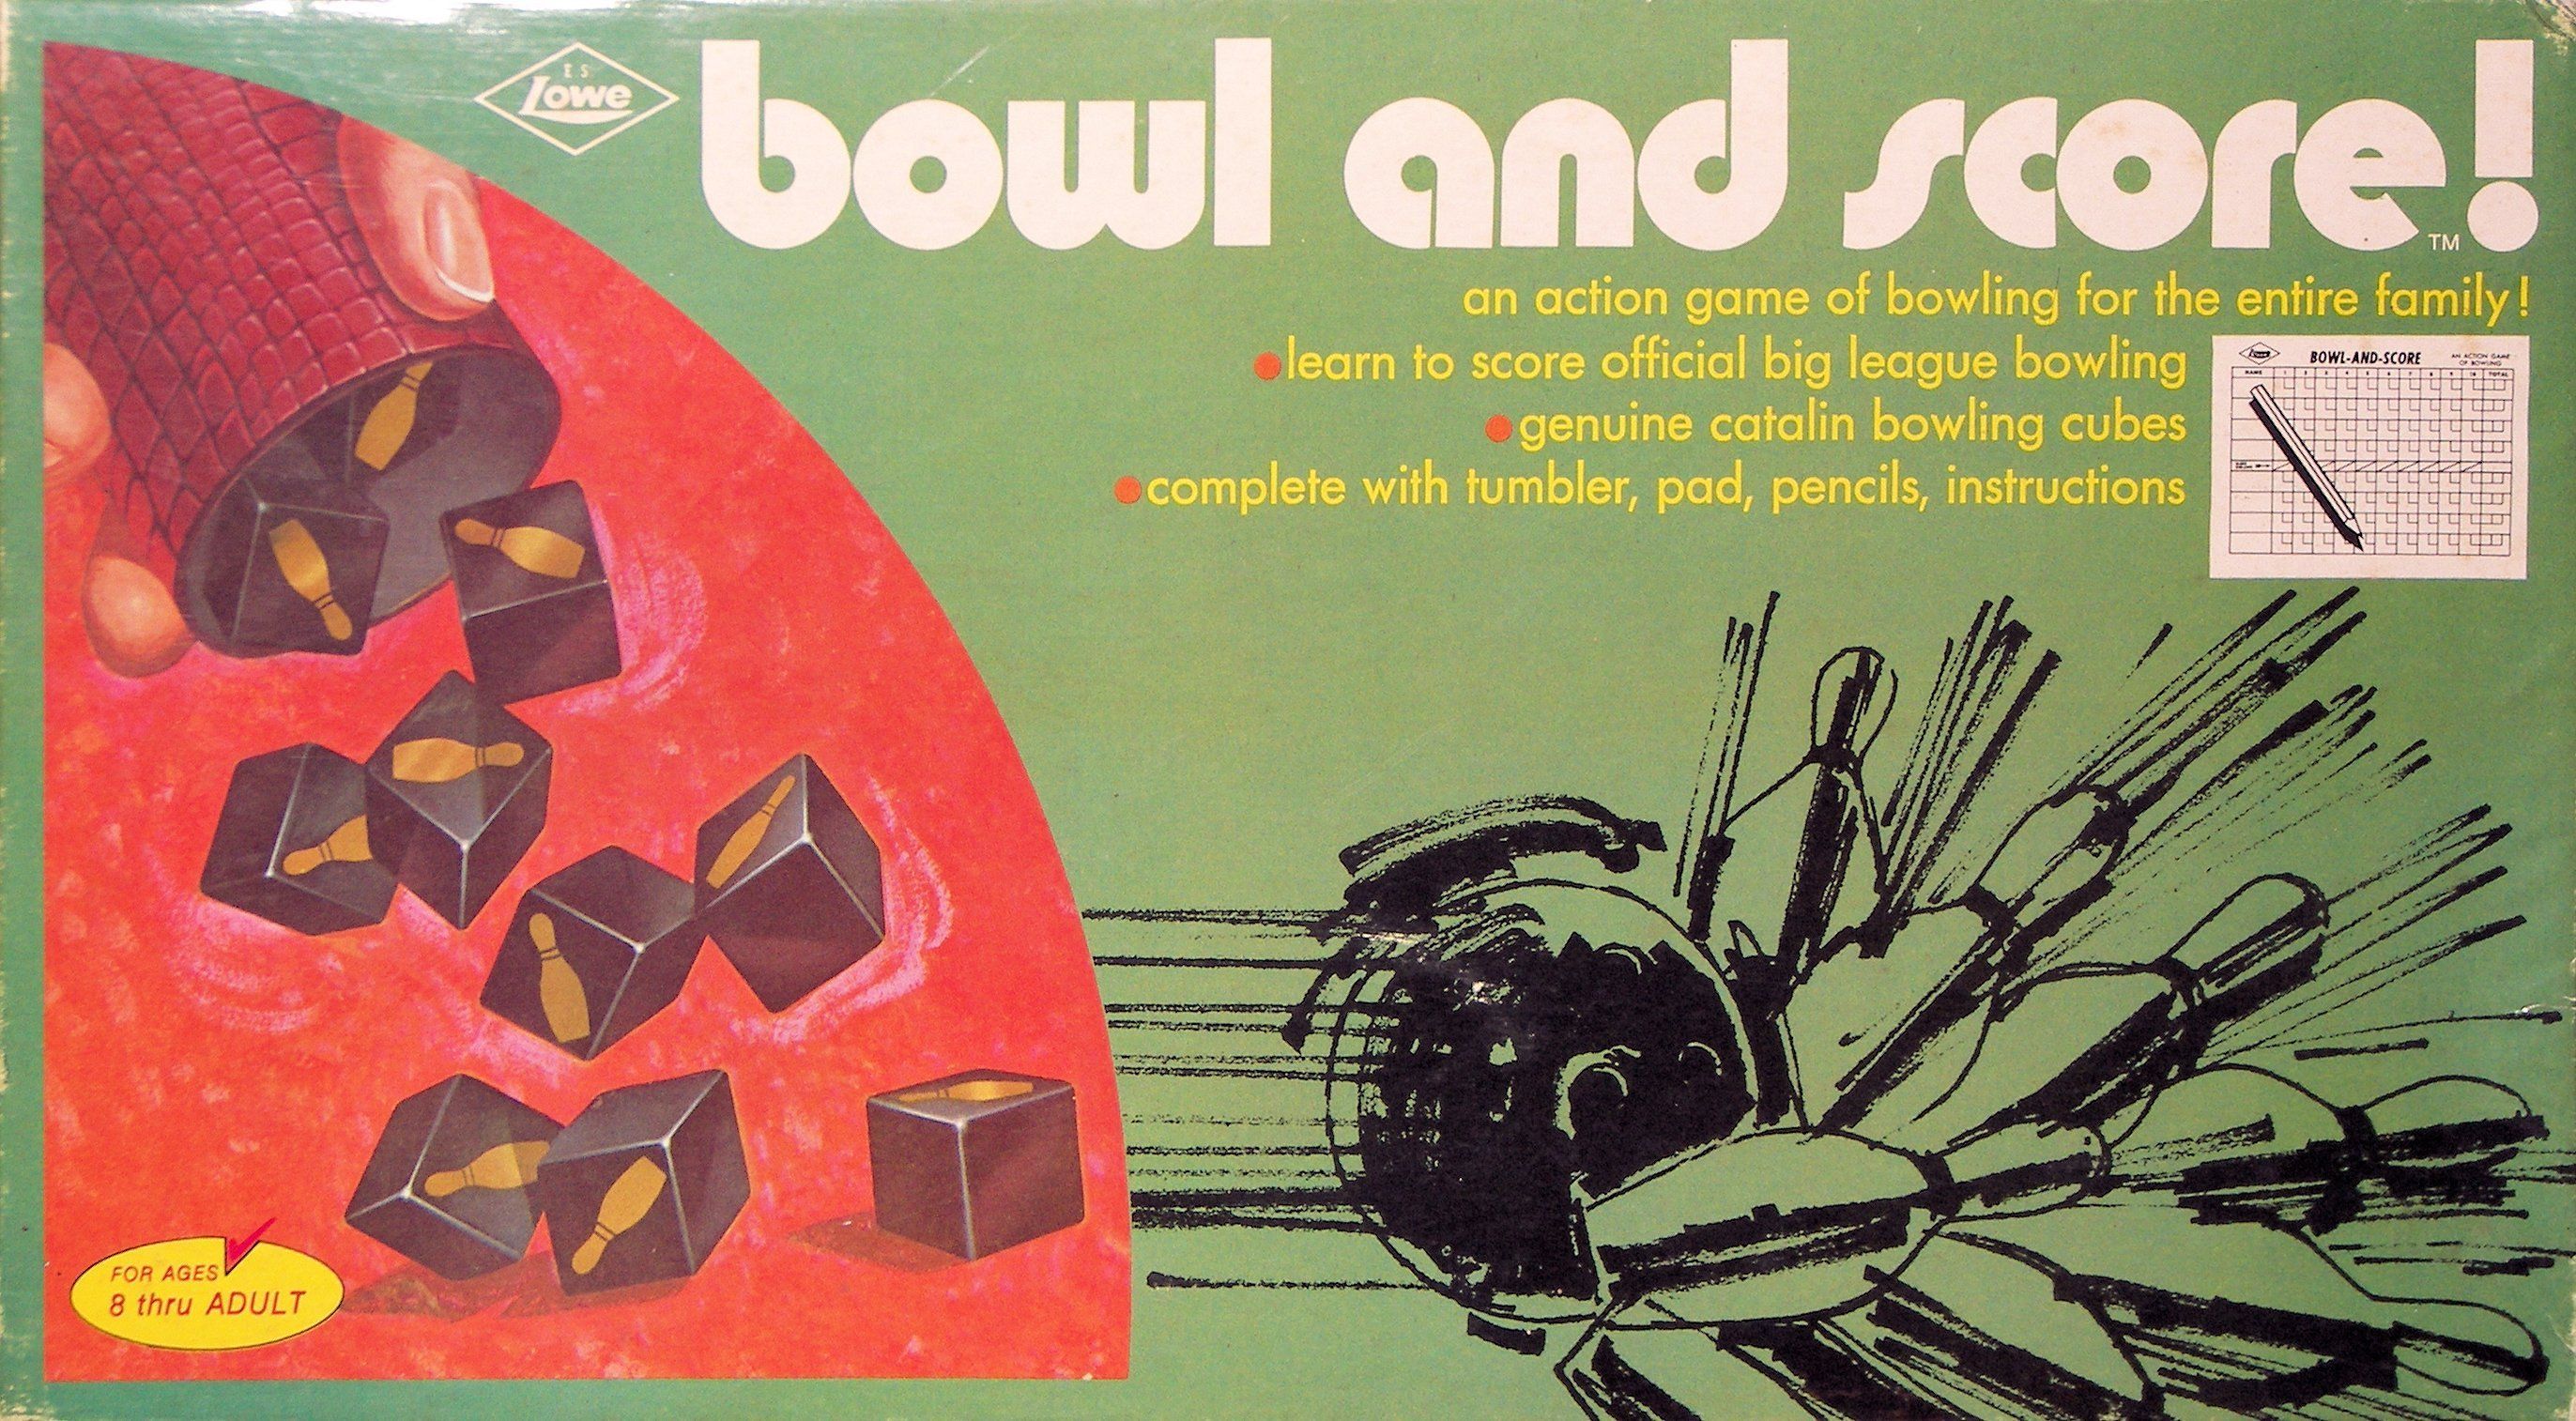 Bowl and Score